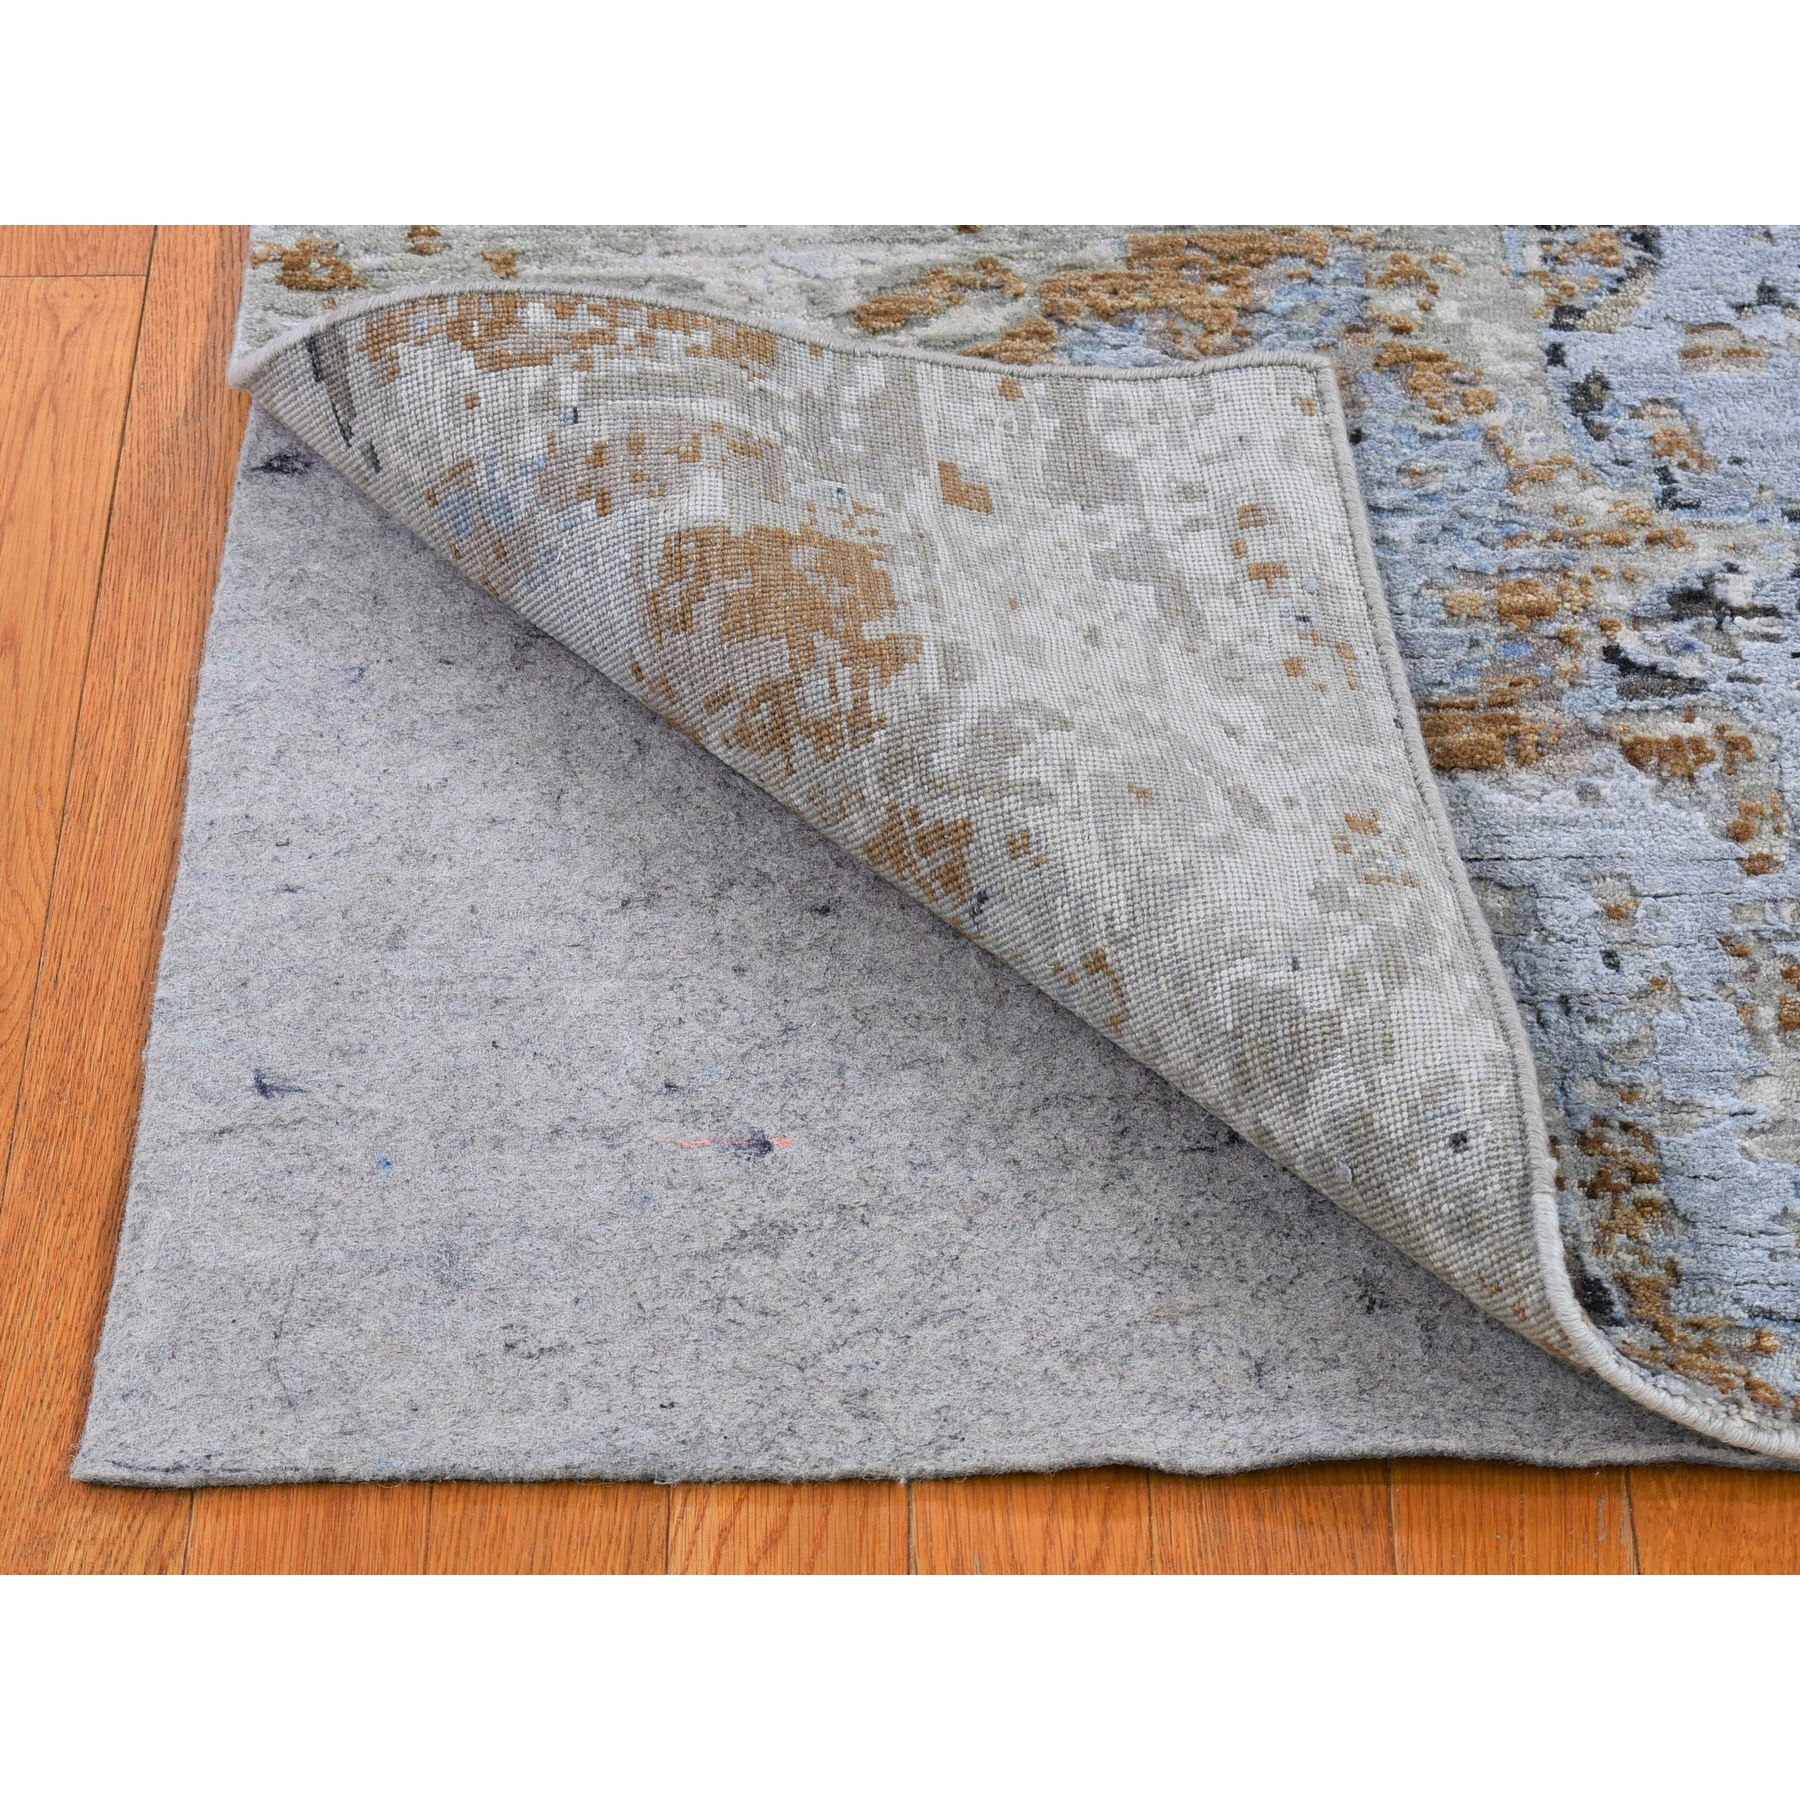 2'10"x5'1" Abstract Design Wool and Silk Hi-Low Pile Denser Weave Hand Woven Gray Oriental Rug 